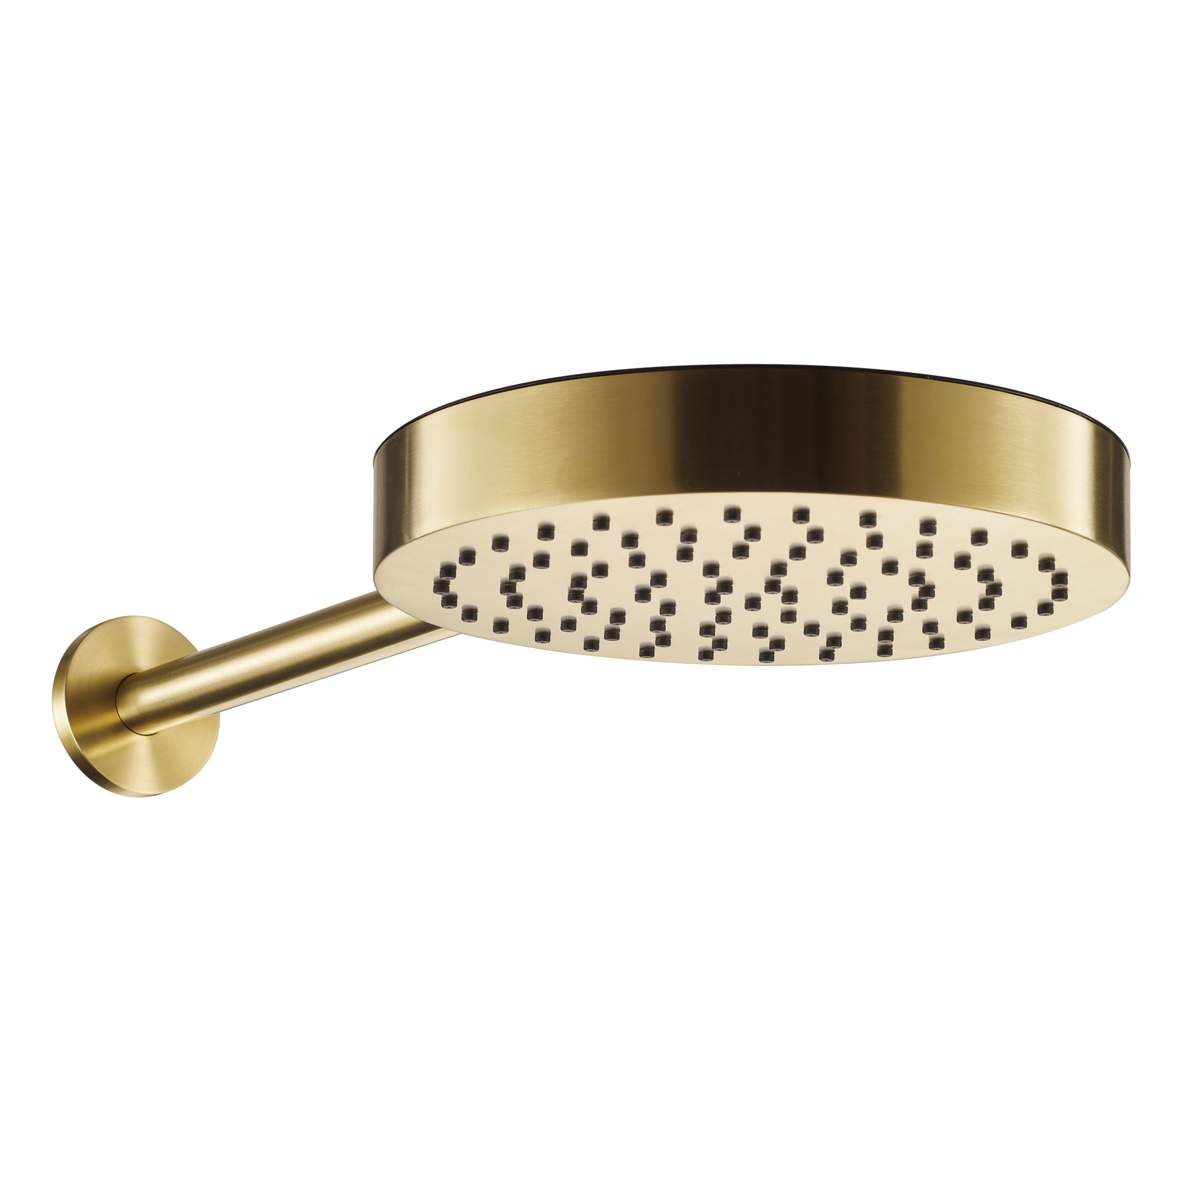 JTP Evo Brushed Brass Shower Head and Arm (63400250BBR)